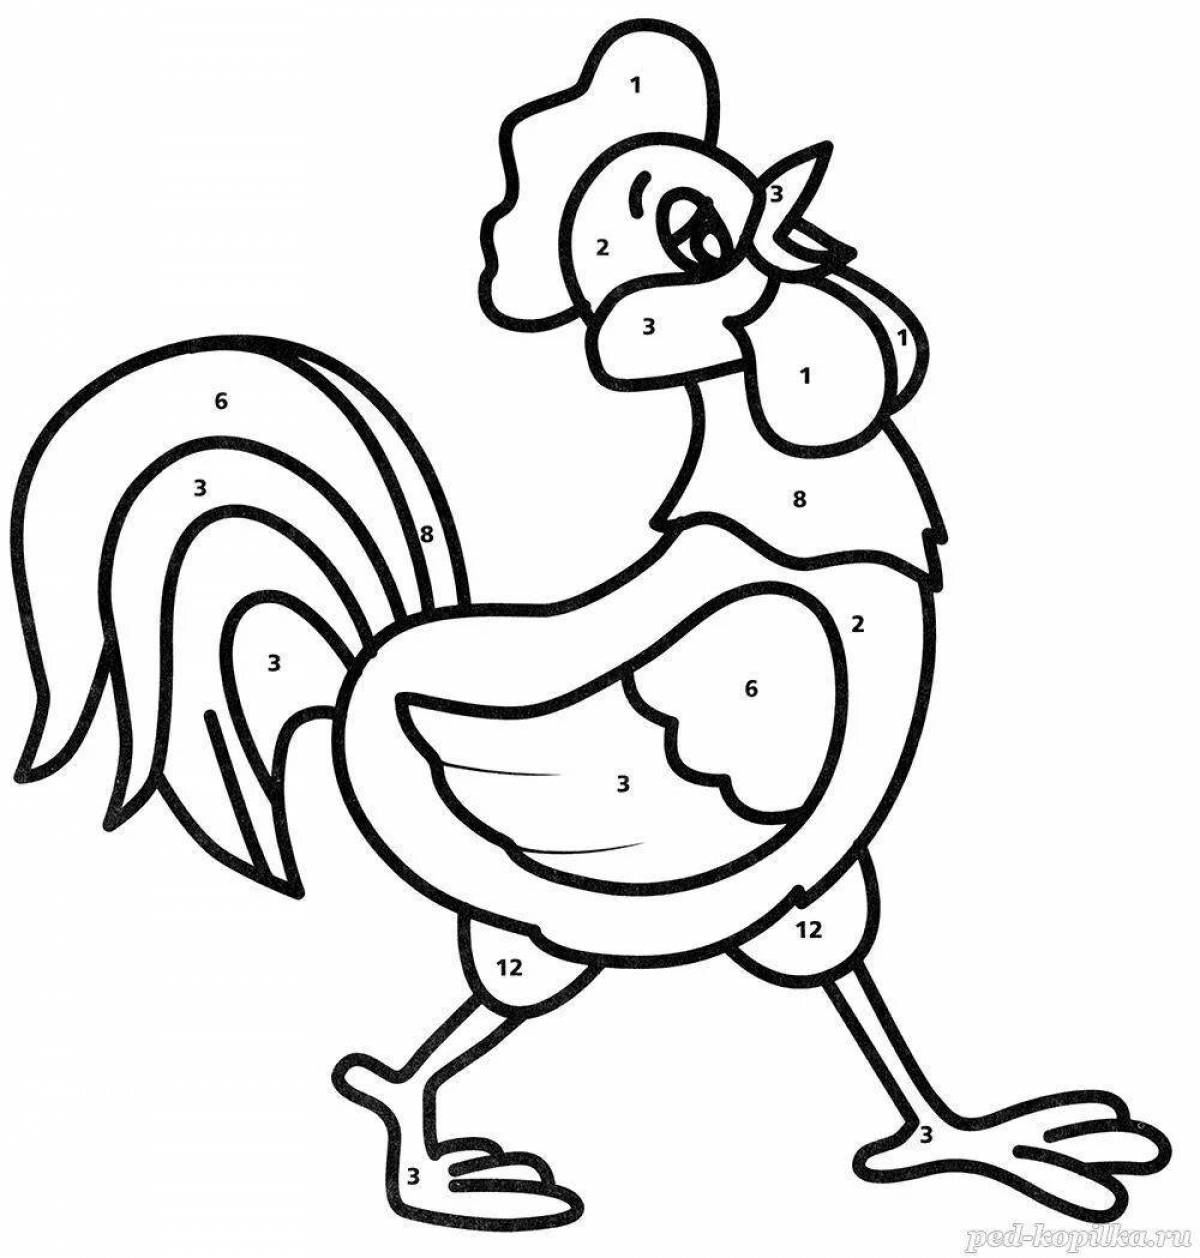 Creative cockerel coloring book for 2-3 year olds